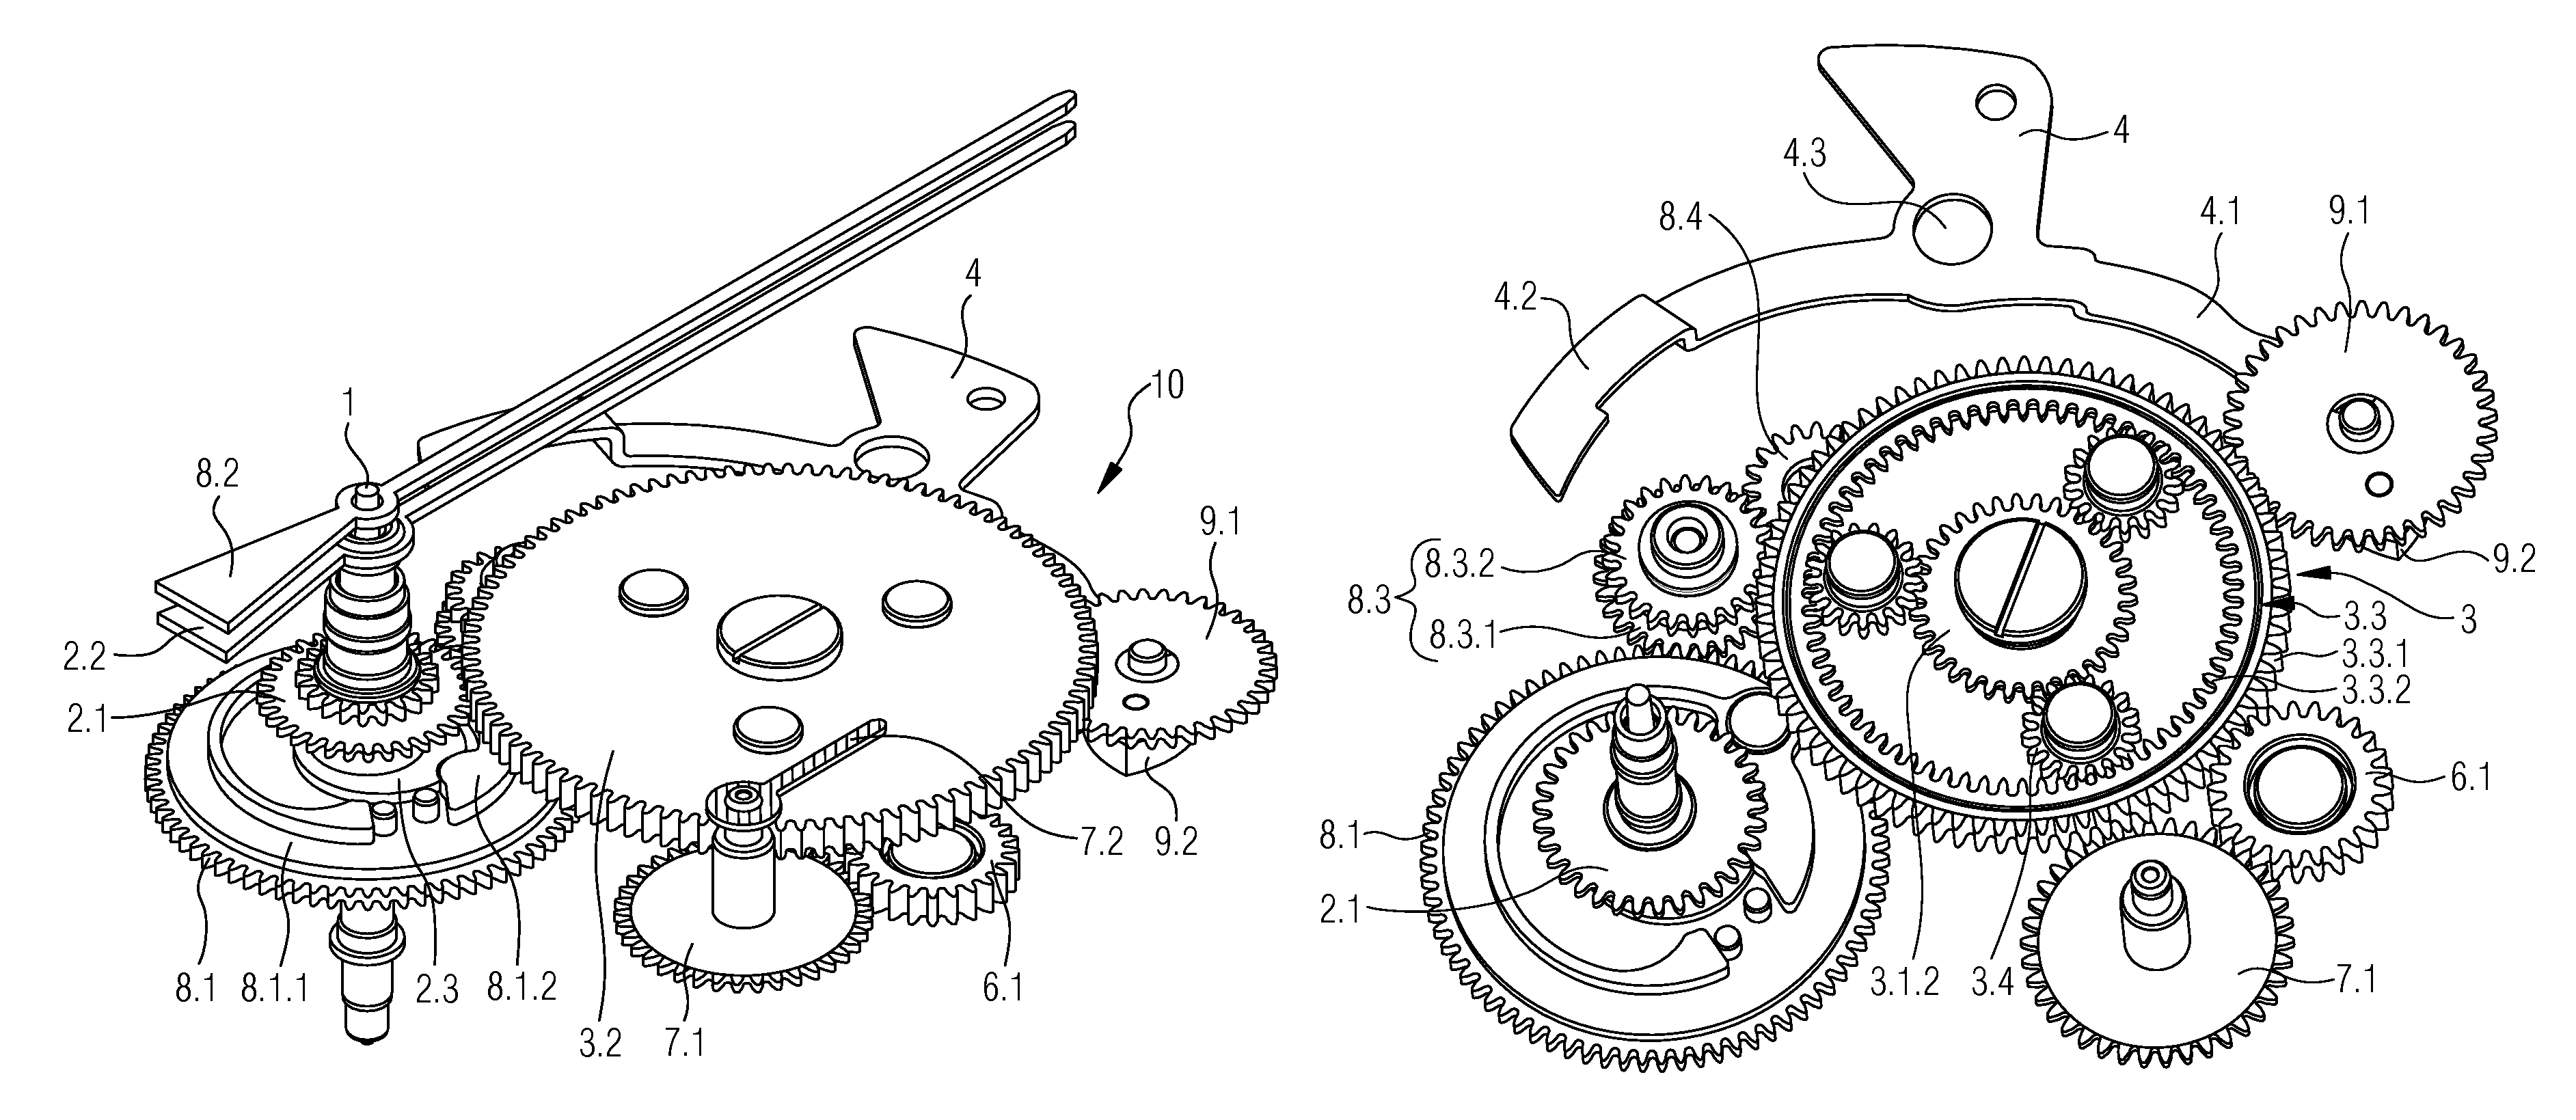 Split-seconds device with epicycloidal train for a timepiece